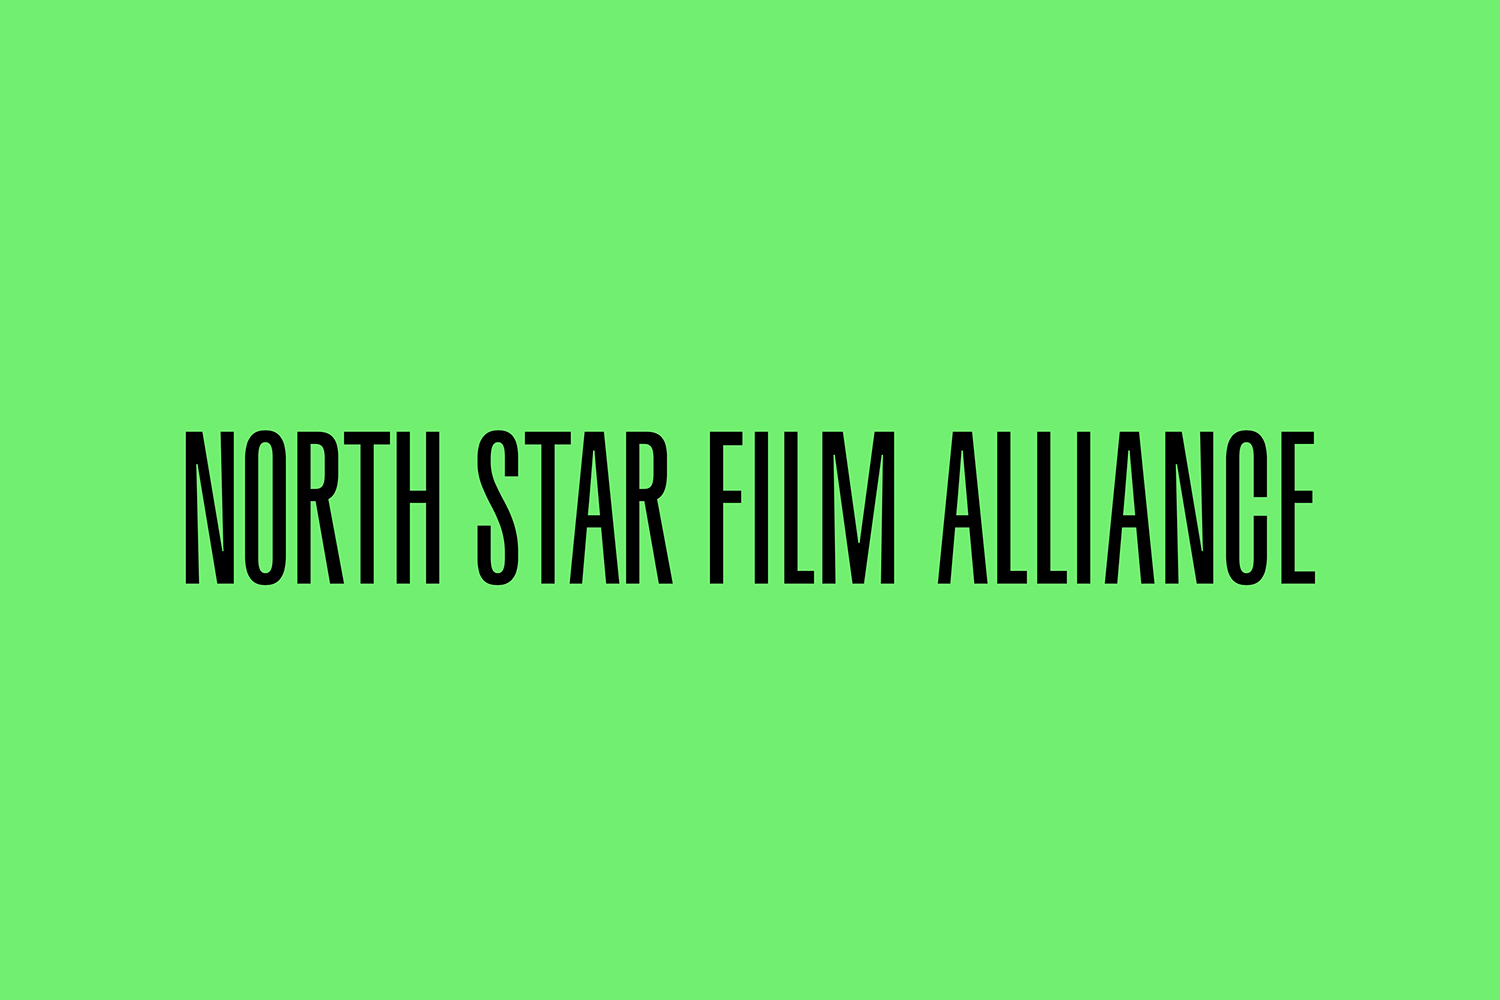 New logo, website, brand guidelines and poster design by Bond for the Northstar Film Alliance